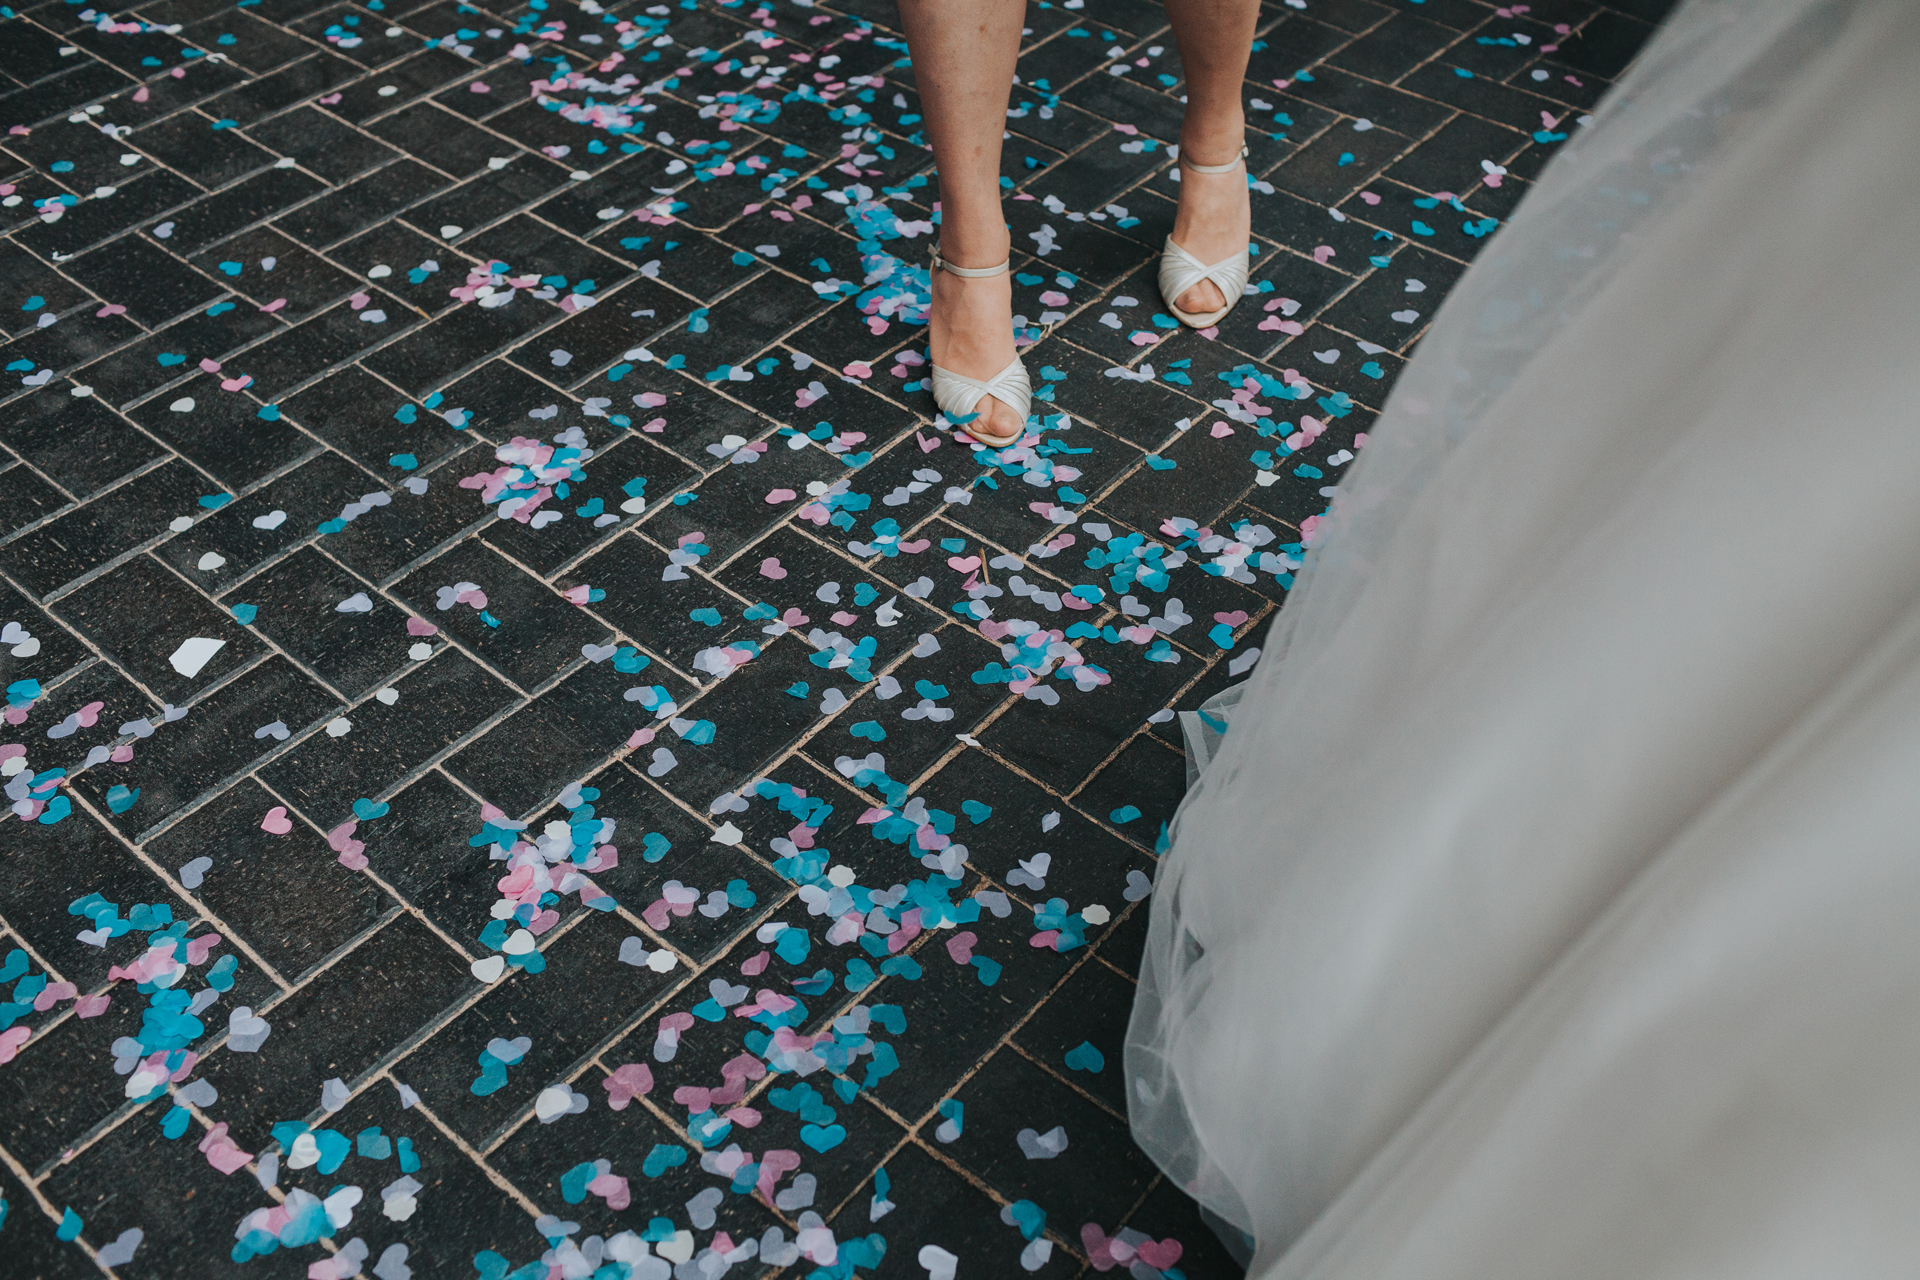 The floor is covered in pink and teal confetti. 